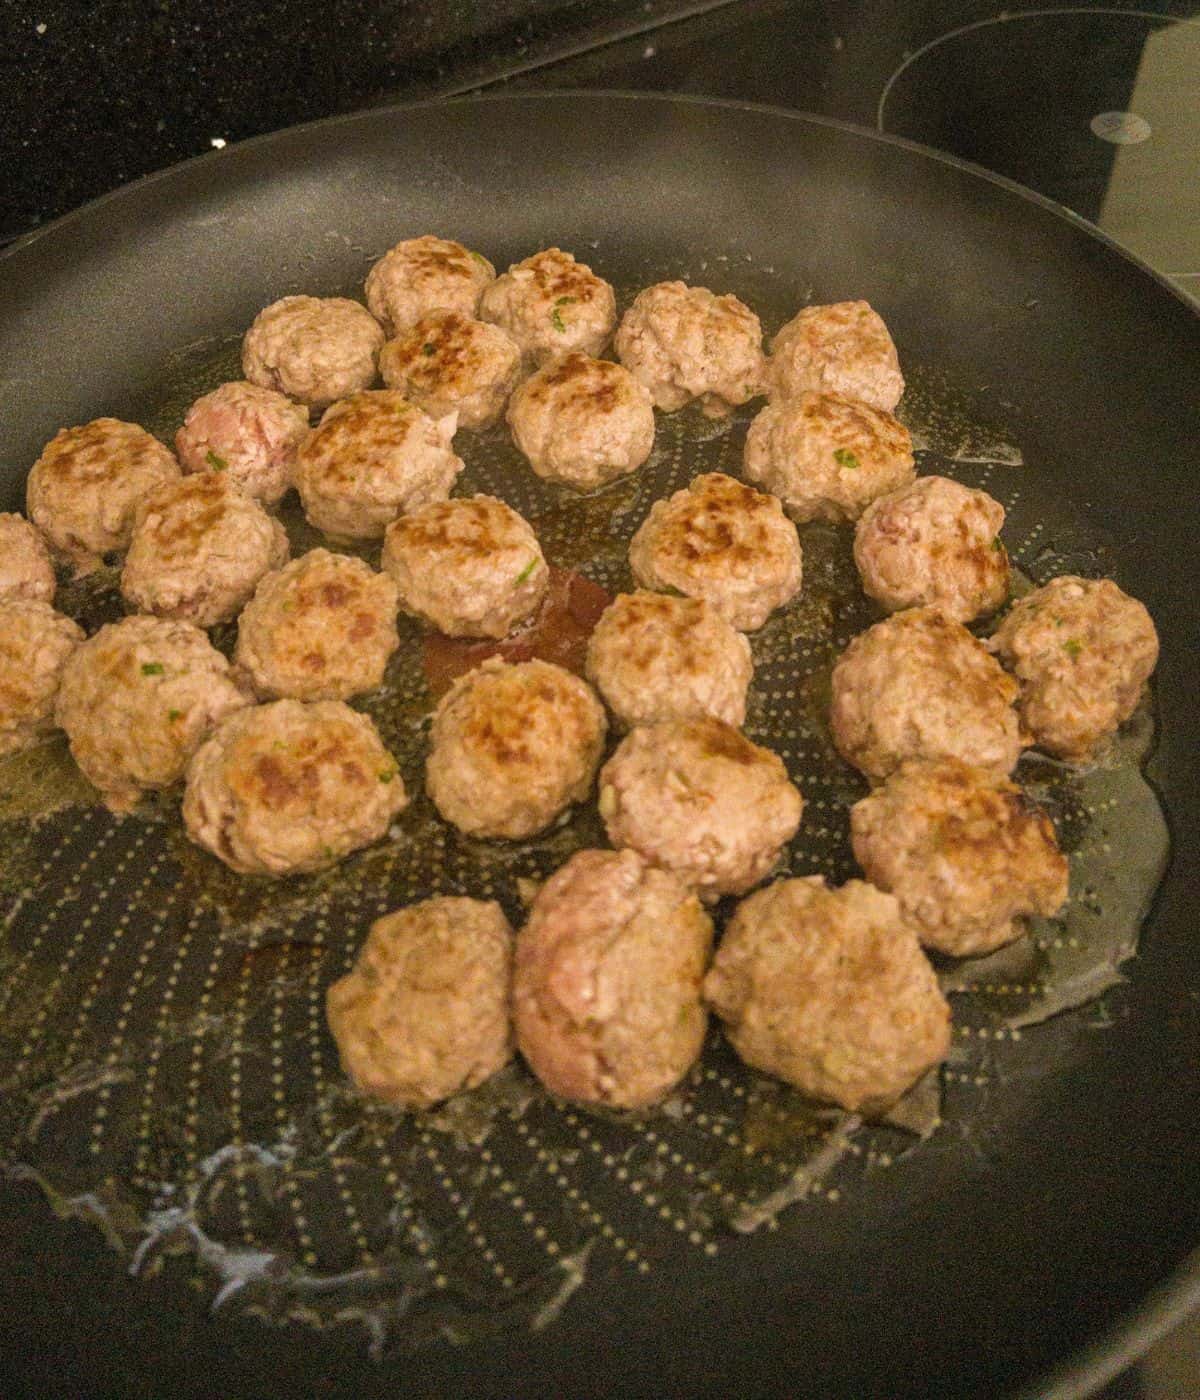 pork and beef meatballs cooking in a frying pan